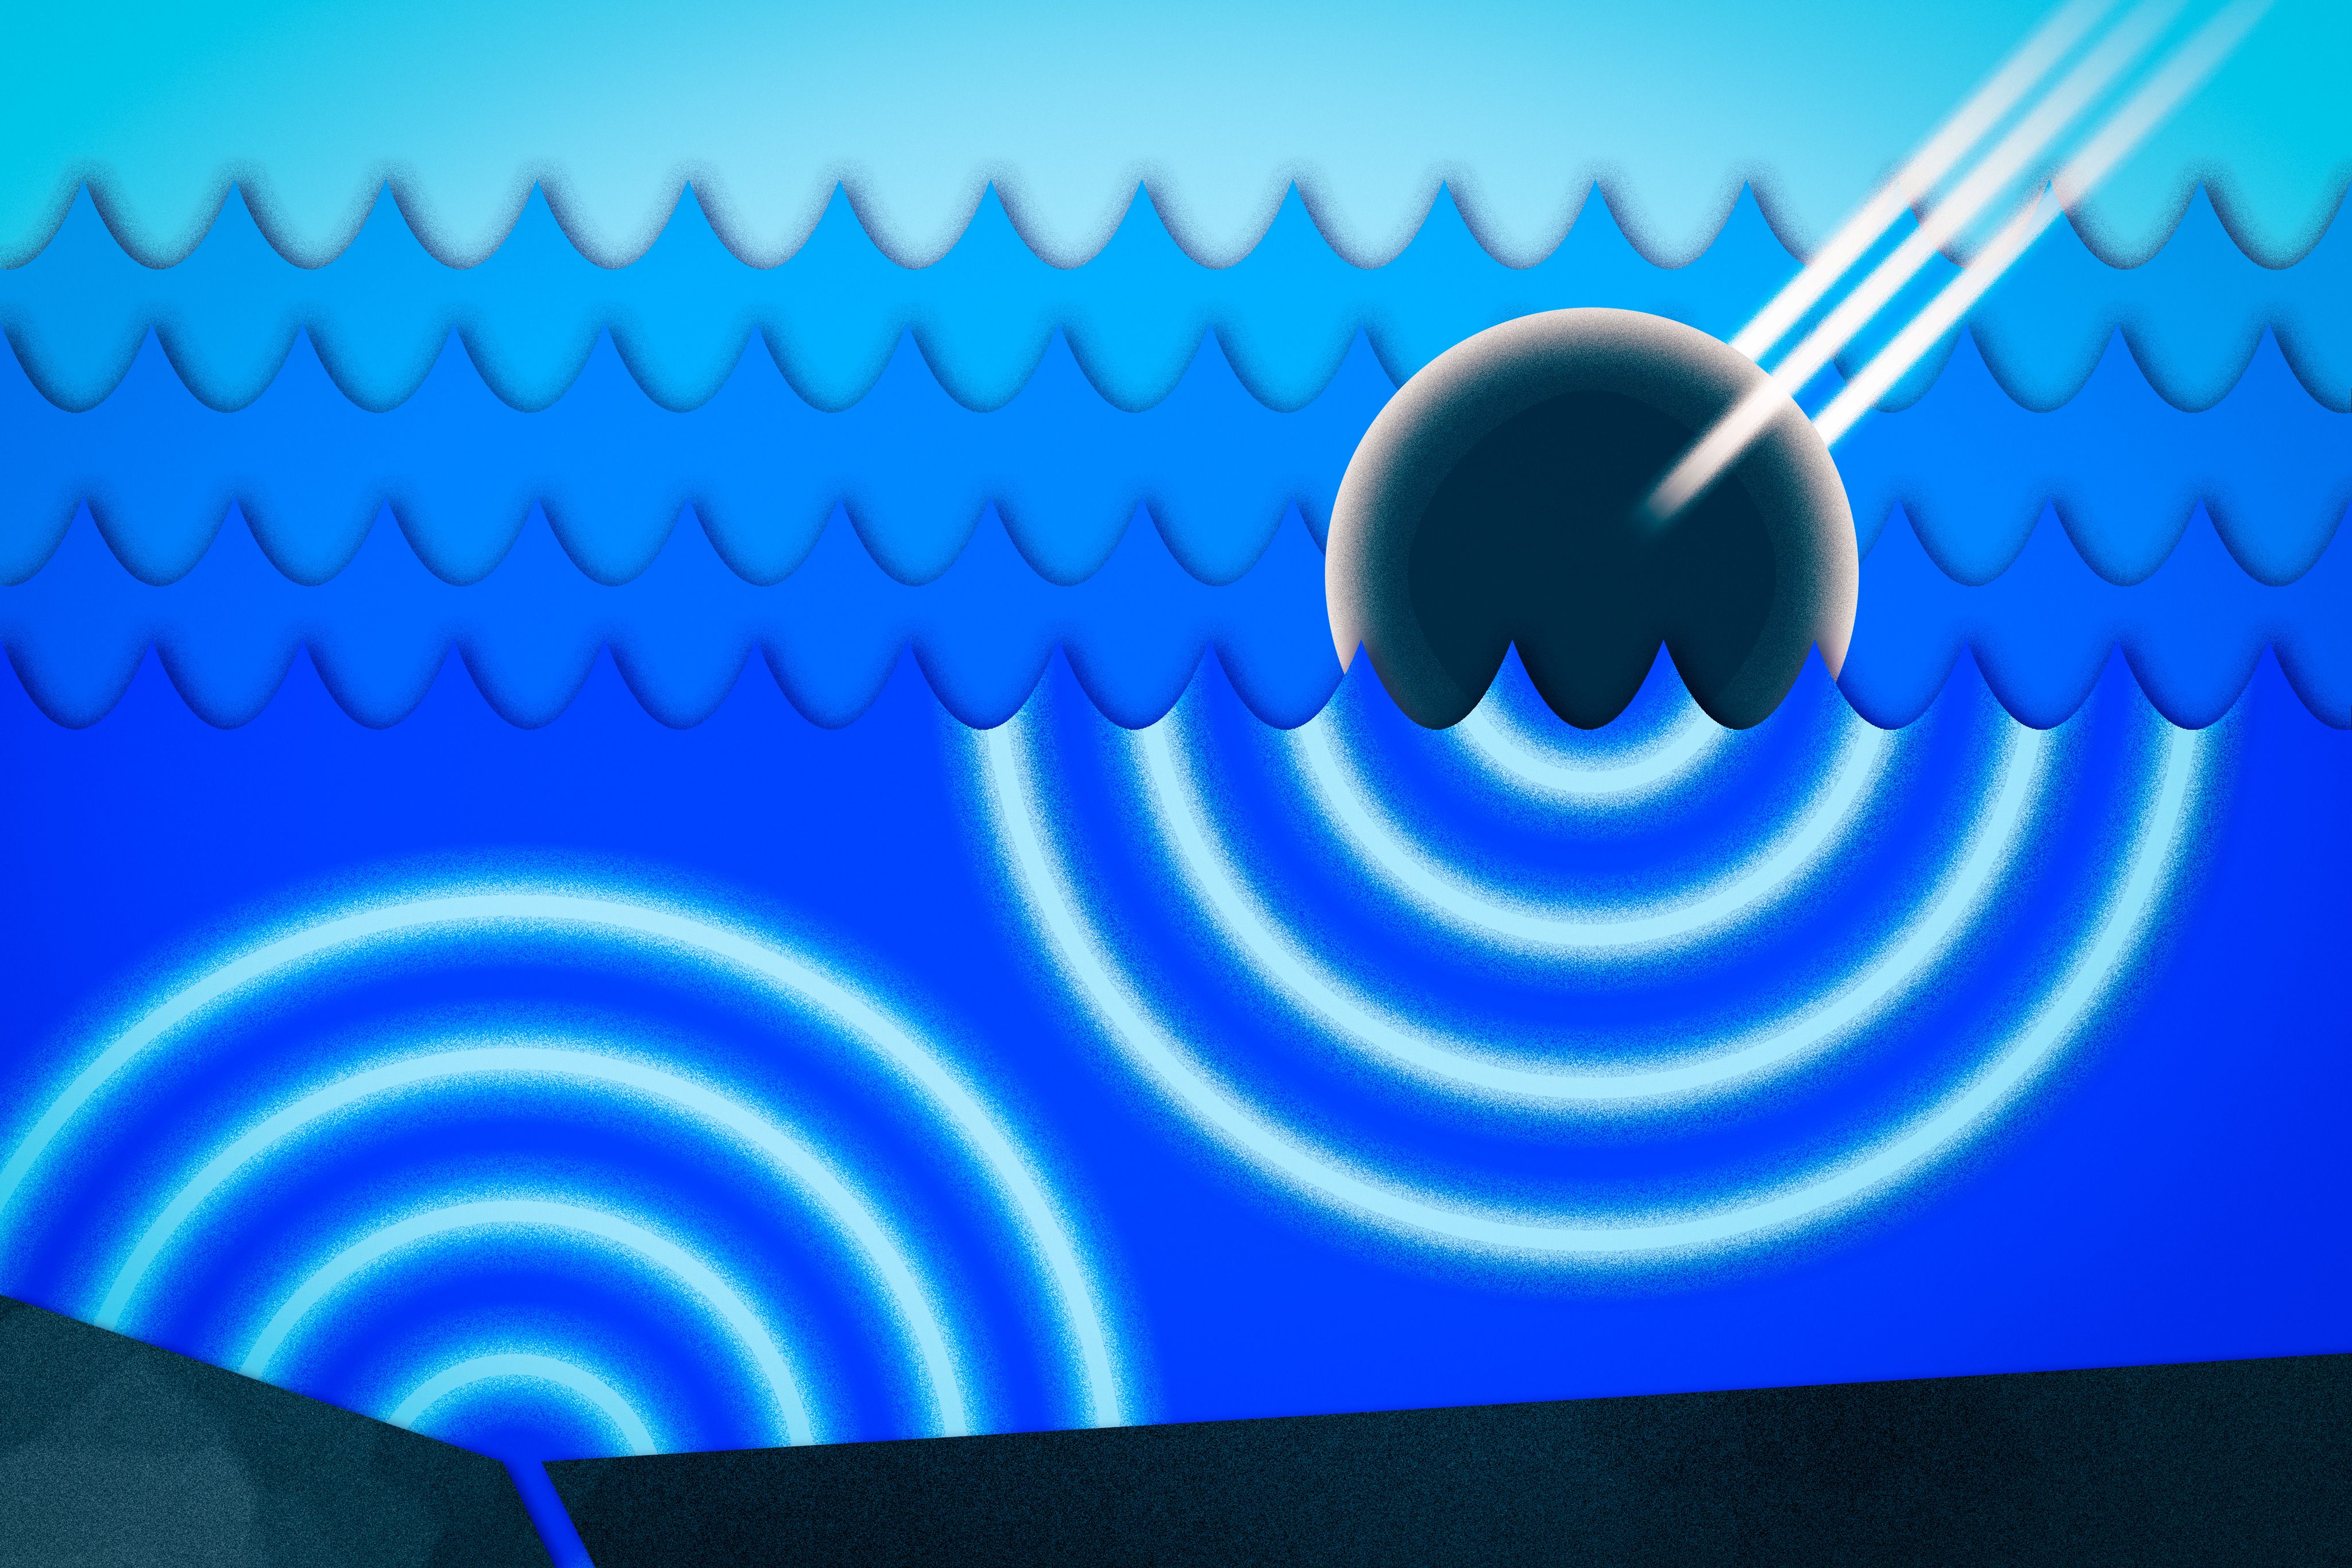 Ocean sound waves may reveal location of incoming objects | MIT News